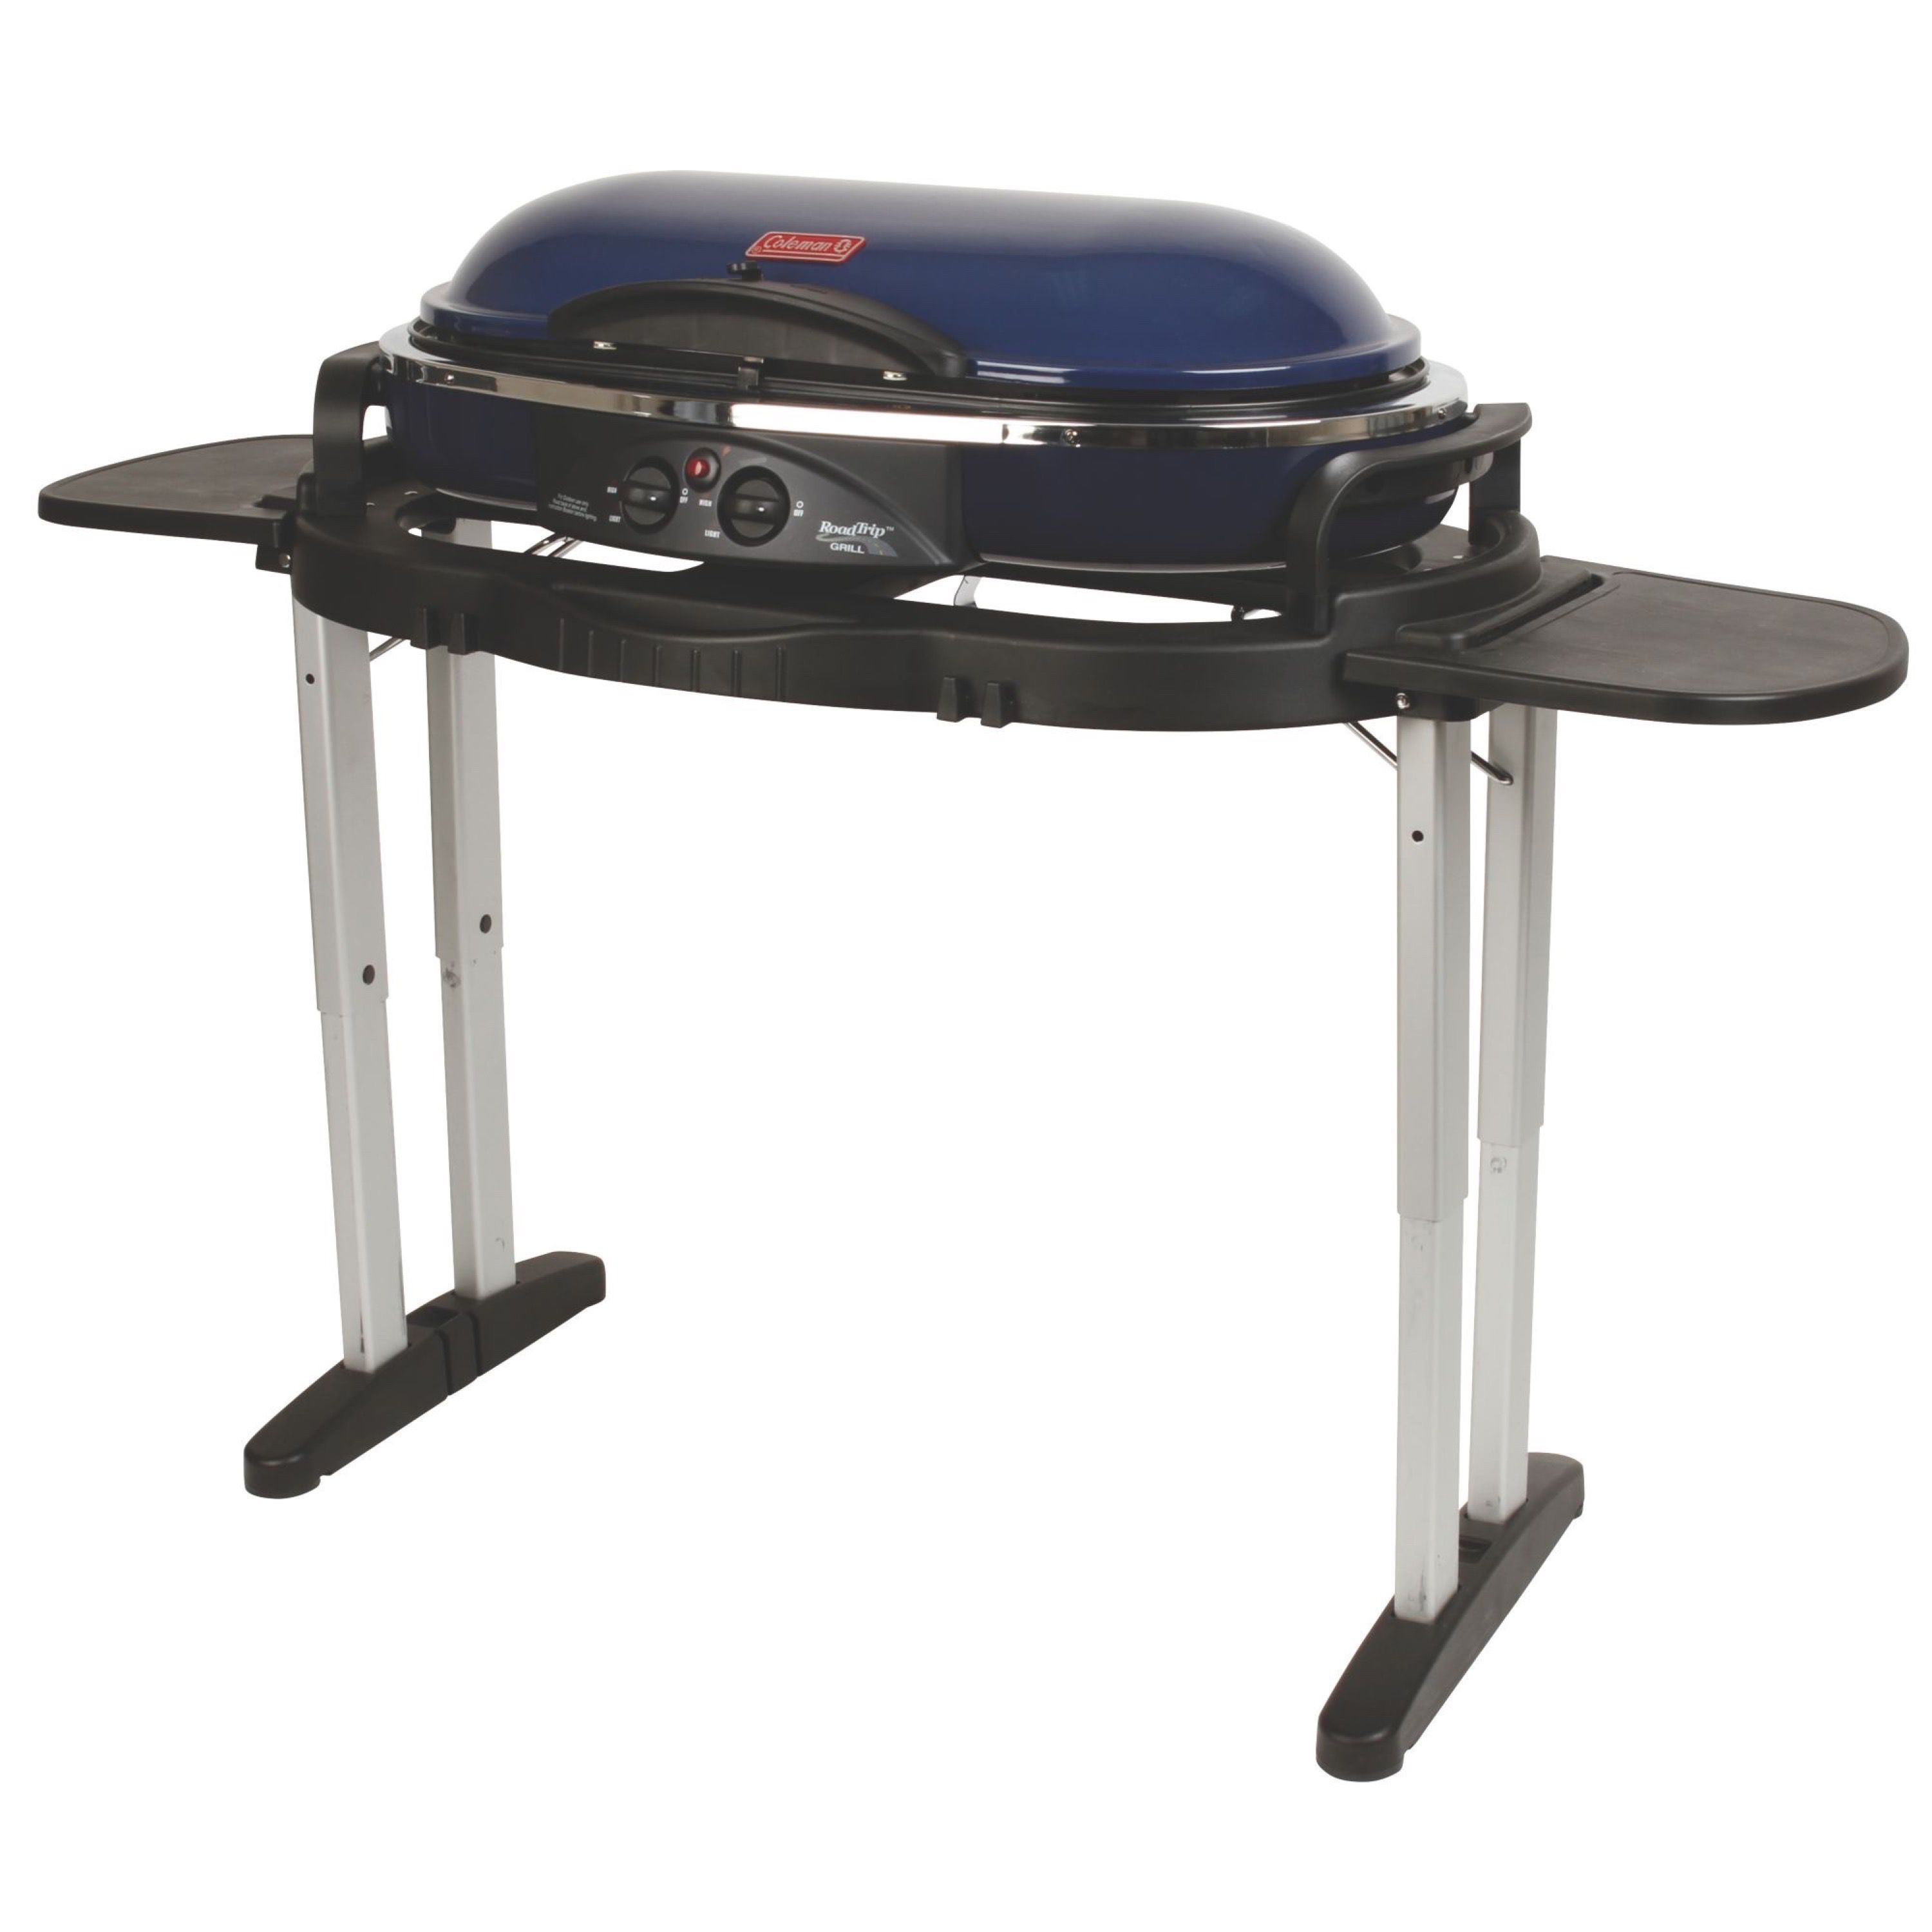 Coleman RoadTrip LX Standup Propane Gas Grill - image 3 of 14